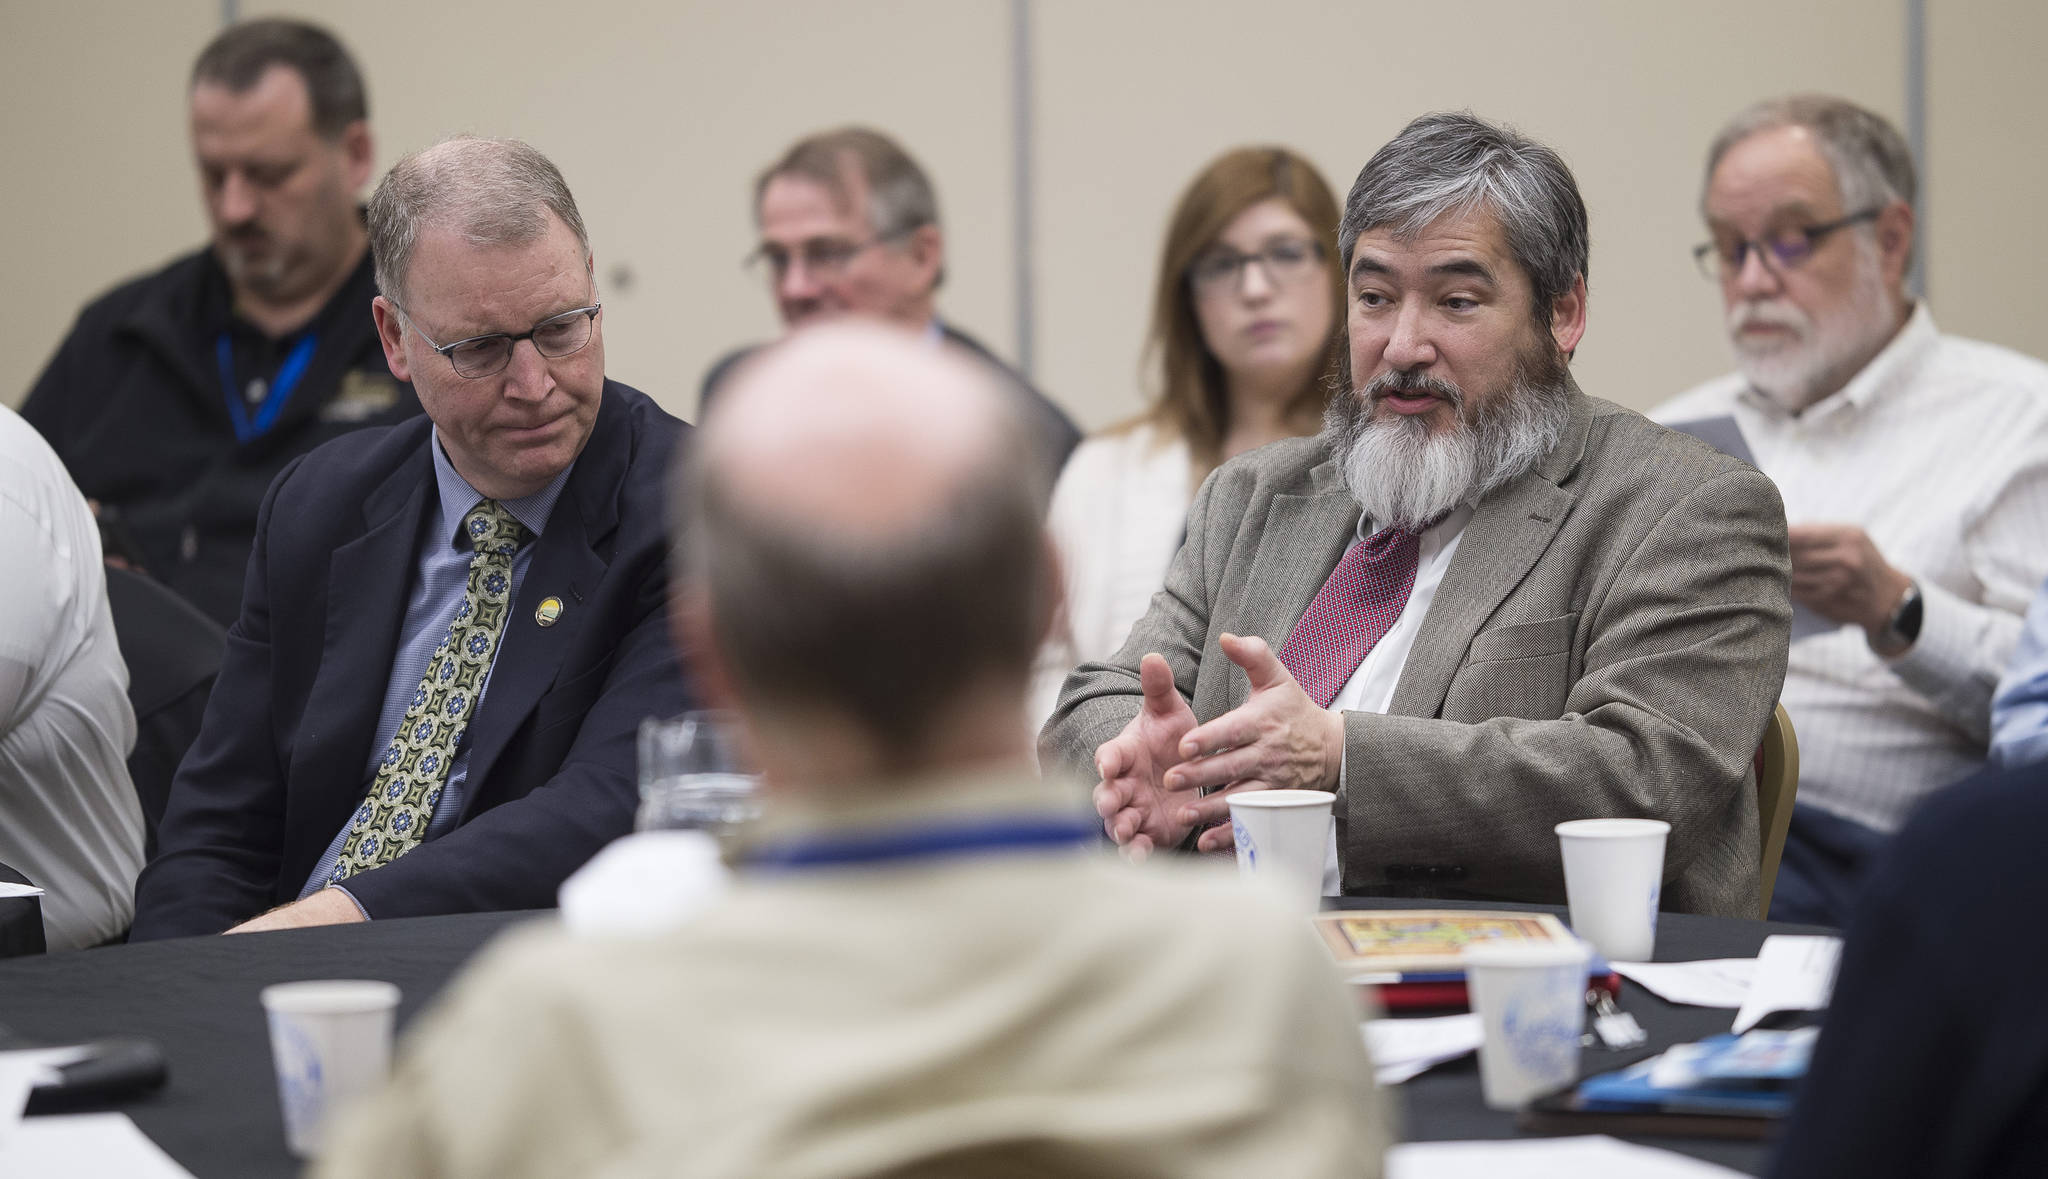 Rep. Sam Kito III, D-Juneau, right, speaks alongside Marc Luiken, Commissioner of the Department of Transportation and Public Facilities during a breakout session on Alaska Marine Highway System Reform at Southeast Conference at the Elizabeth Peratrovich Hall on Wednesday, Feb. 14, 2018. (Michael Penn | Juneau Empire)